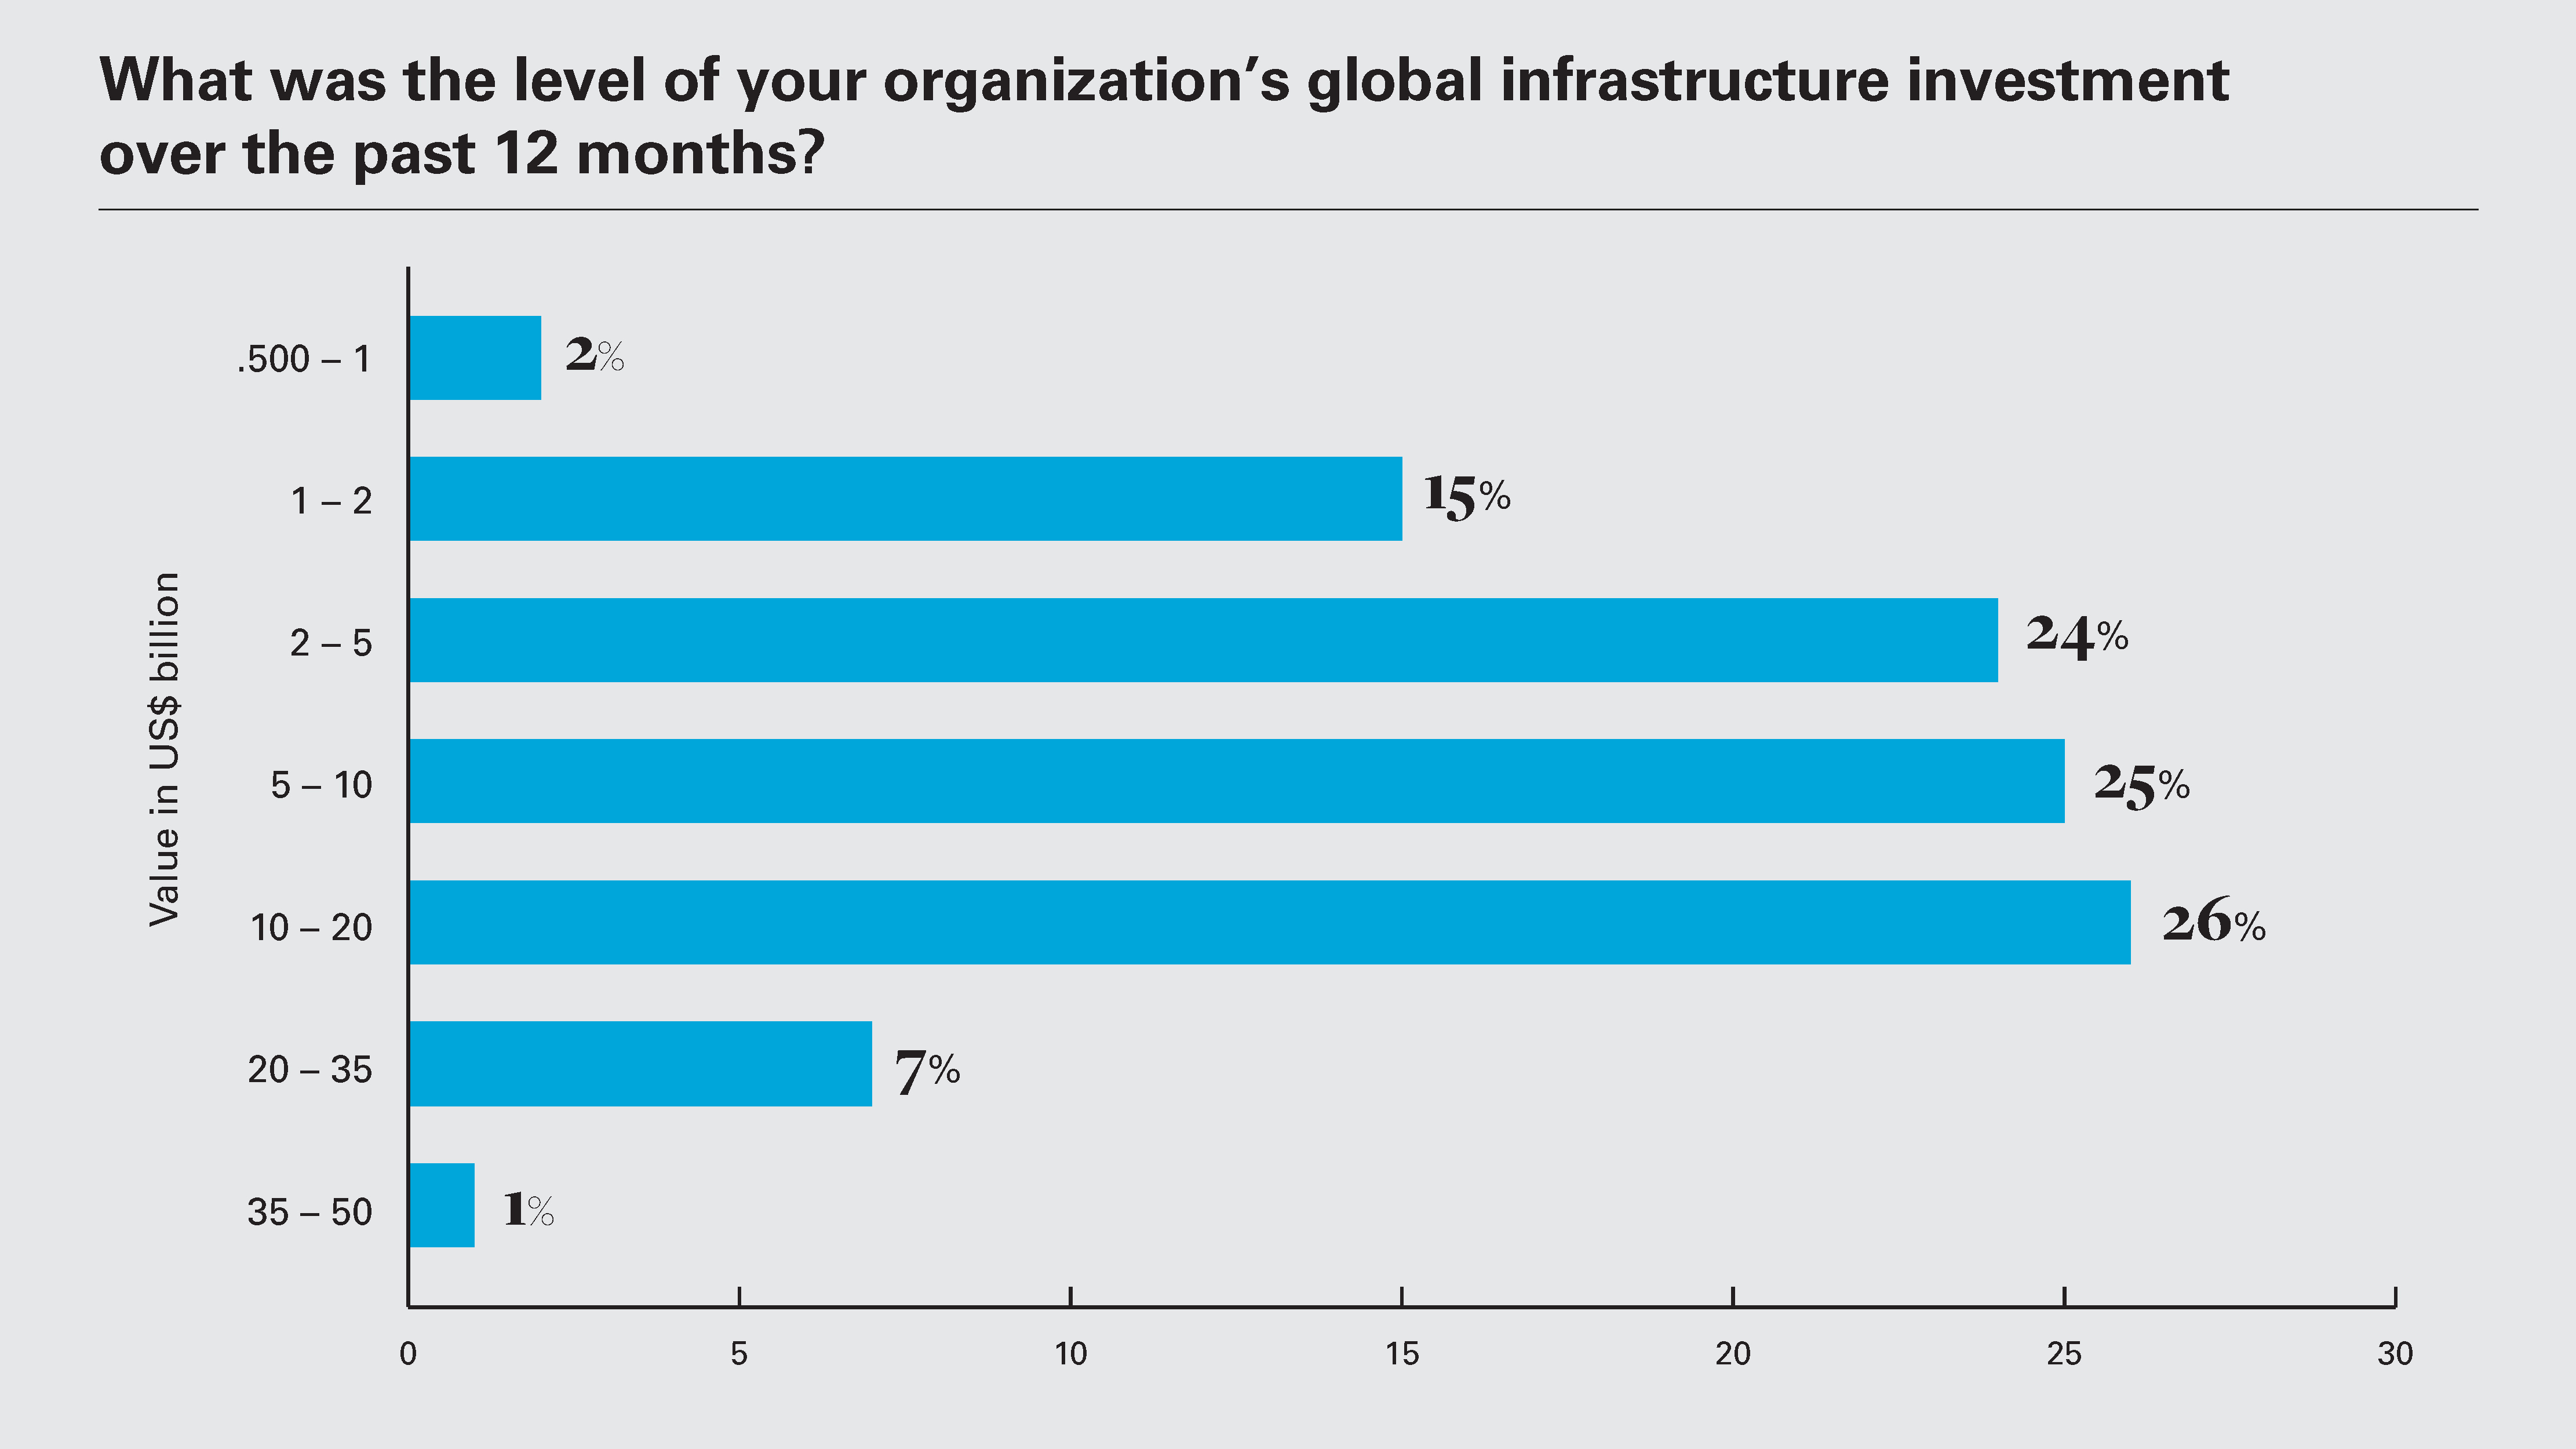 What was the level of your organization’s global infrastructure investment over the past 12 months? 